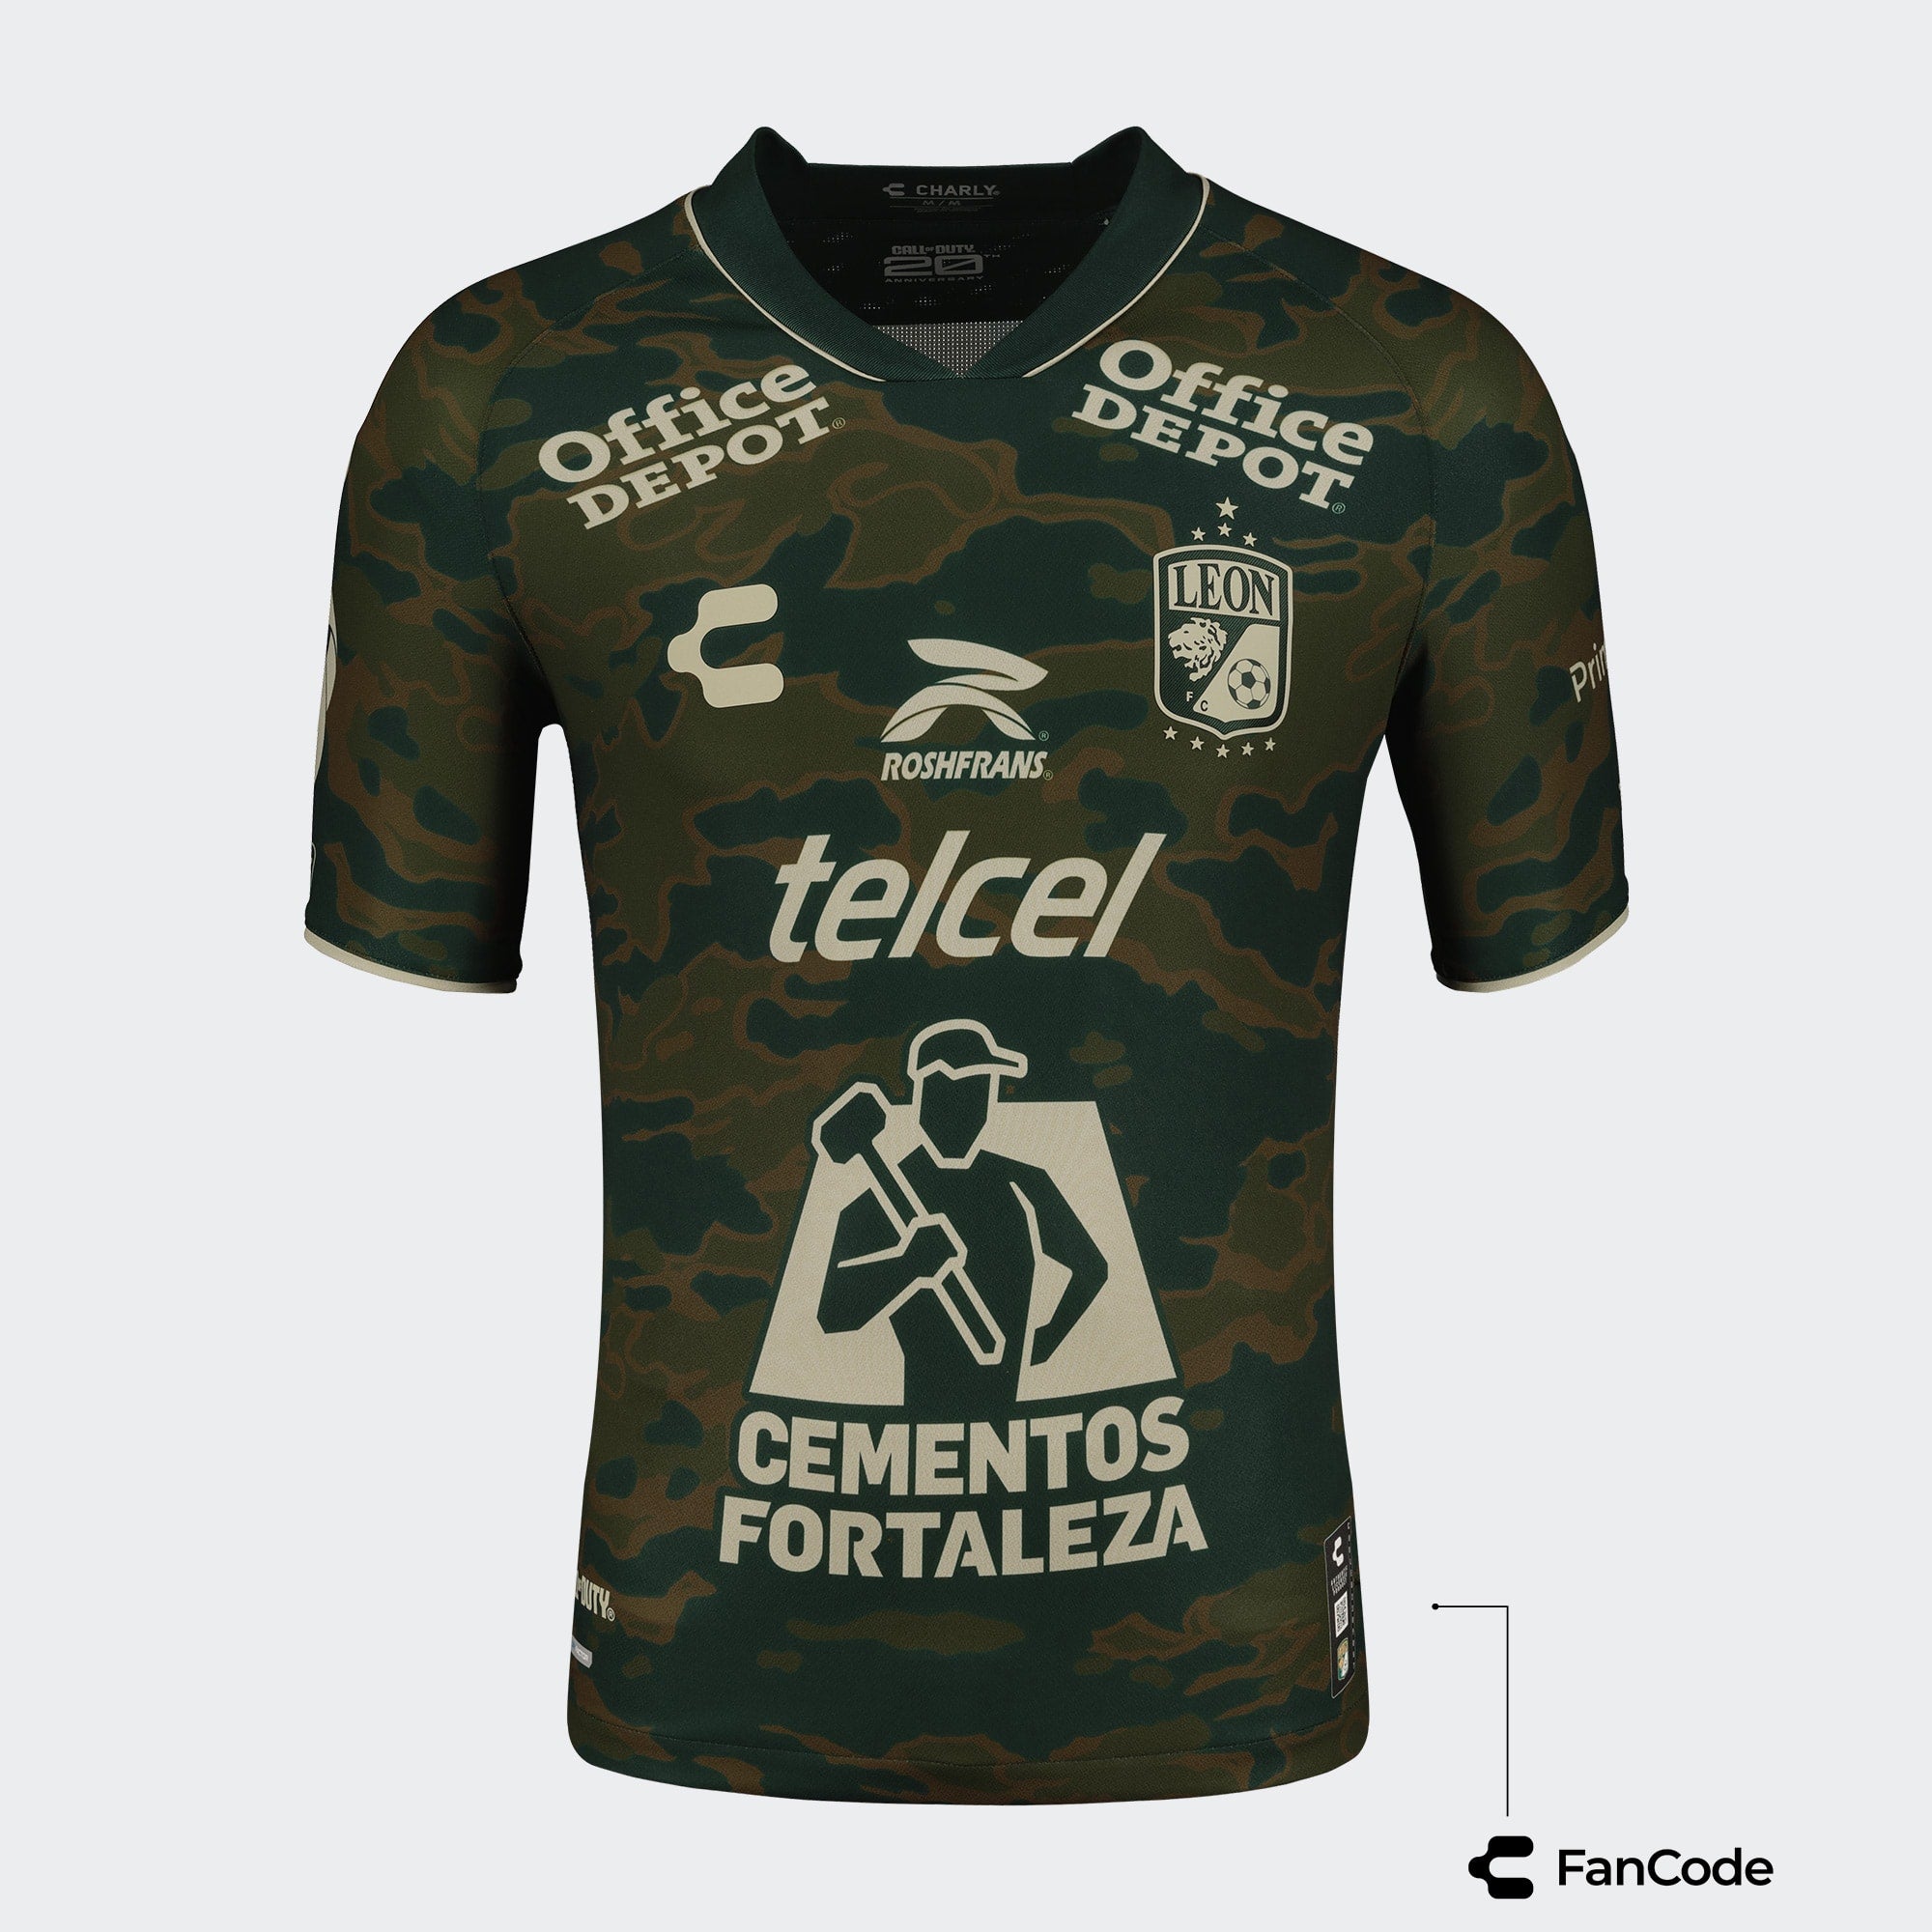 Charly Call of Duty x CHARLY León Special Edition Jersey for Men 23-24